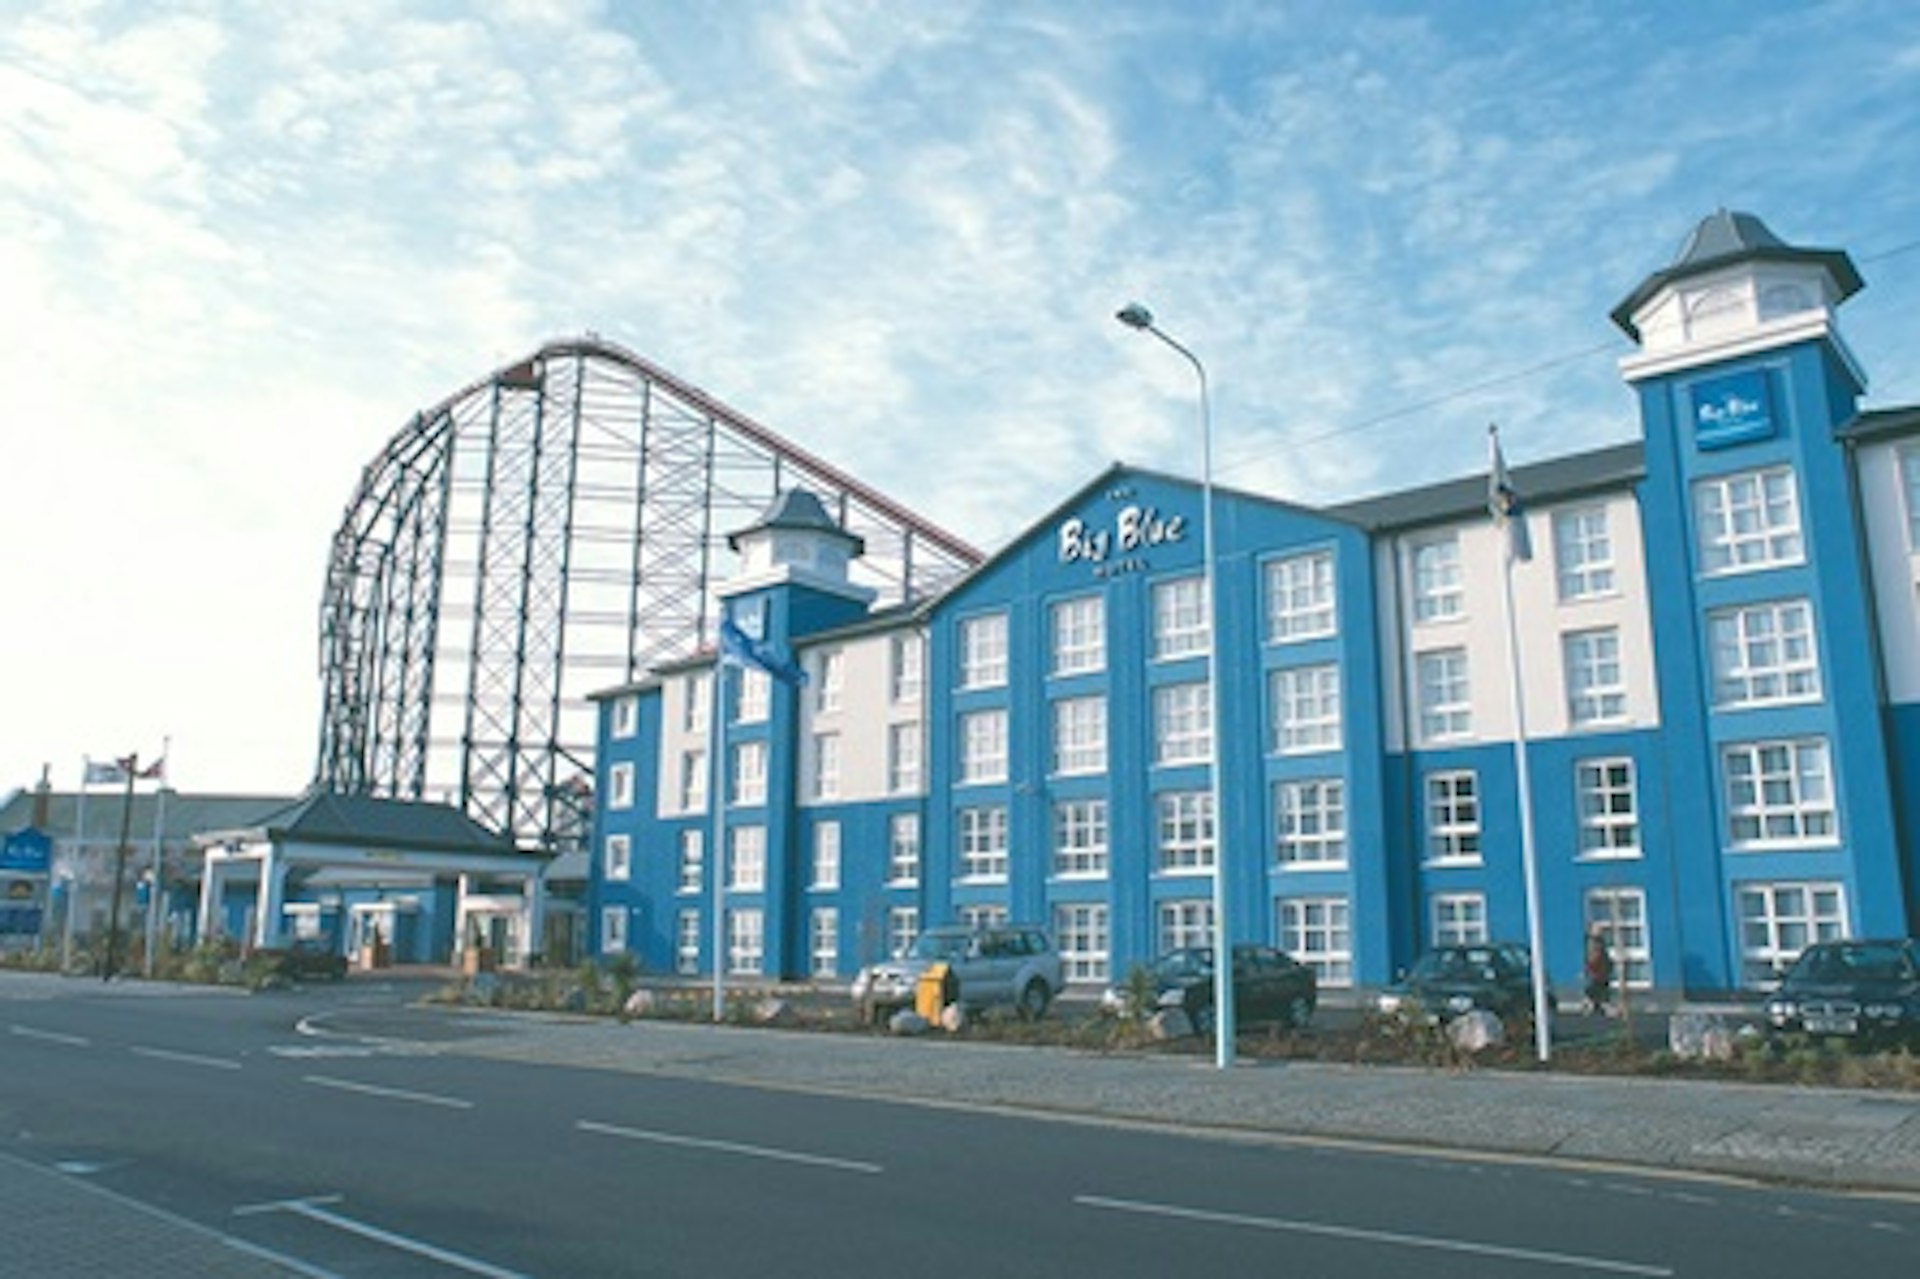 One Night Coastal Escape for Two at The Big Blue Hotel, Blackpool 1